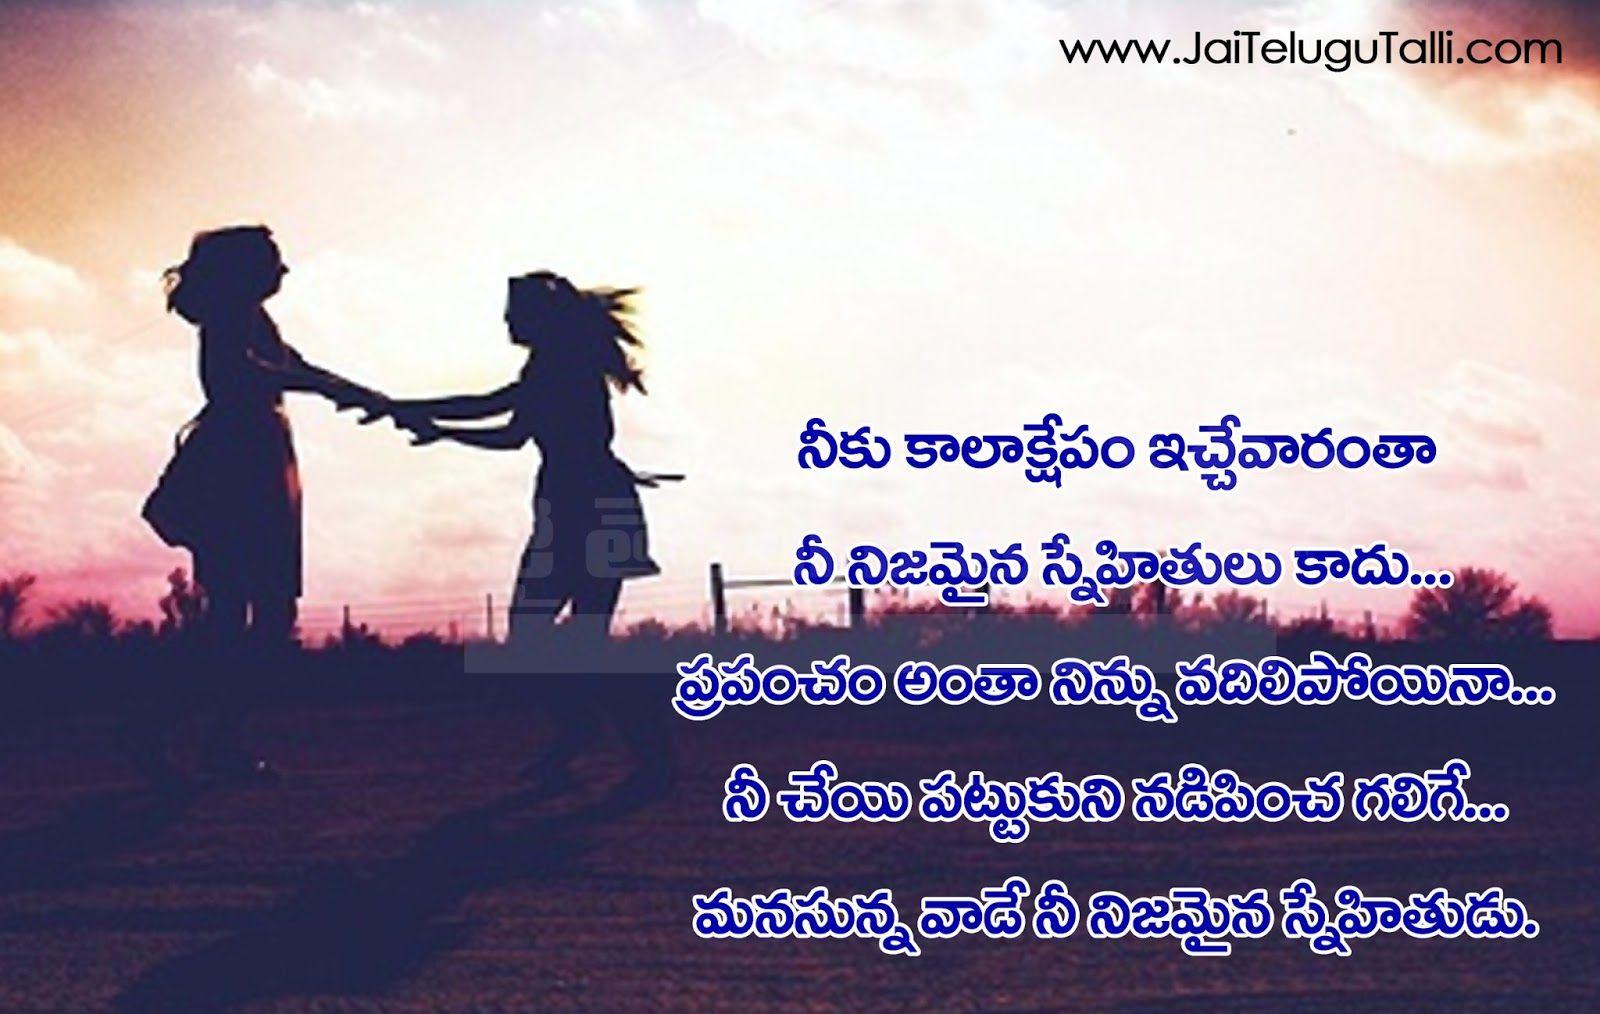 Friendship Quotes In Telugu HD Wallpaper Image Gallery